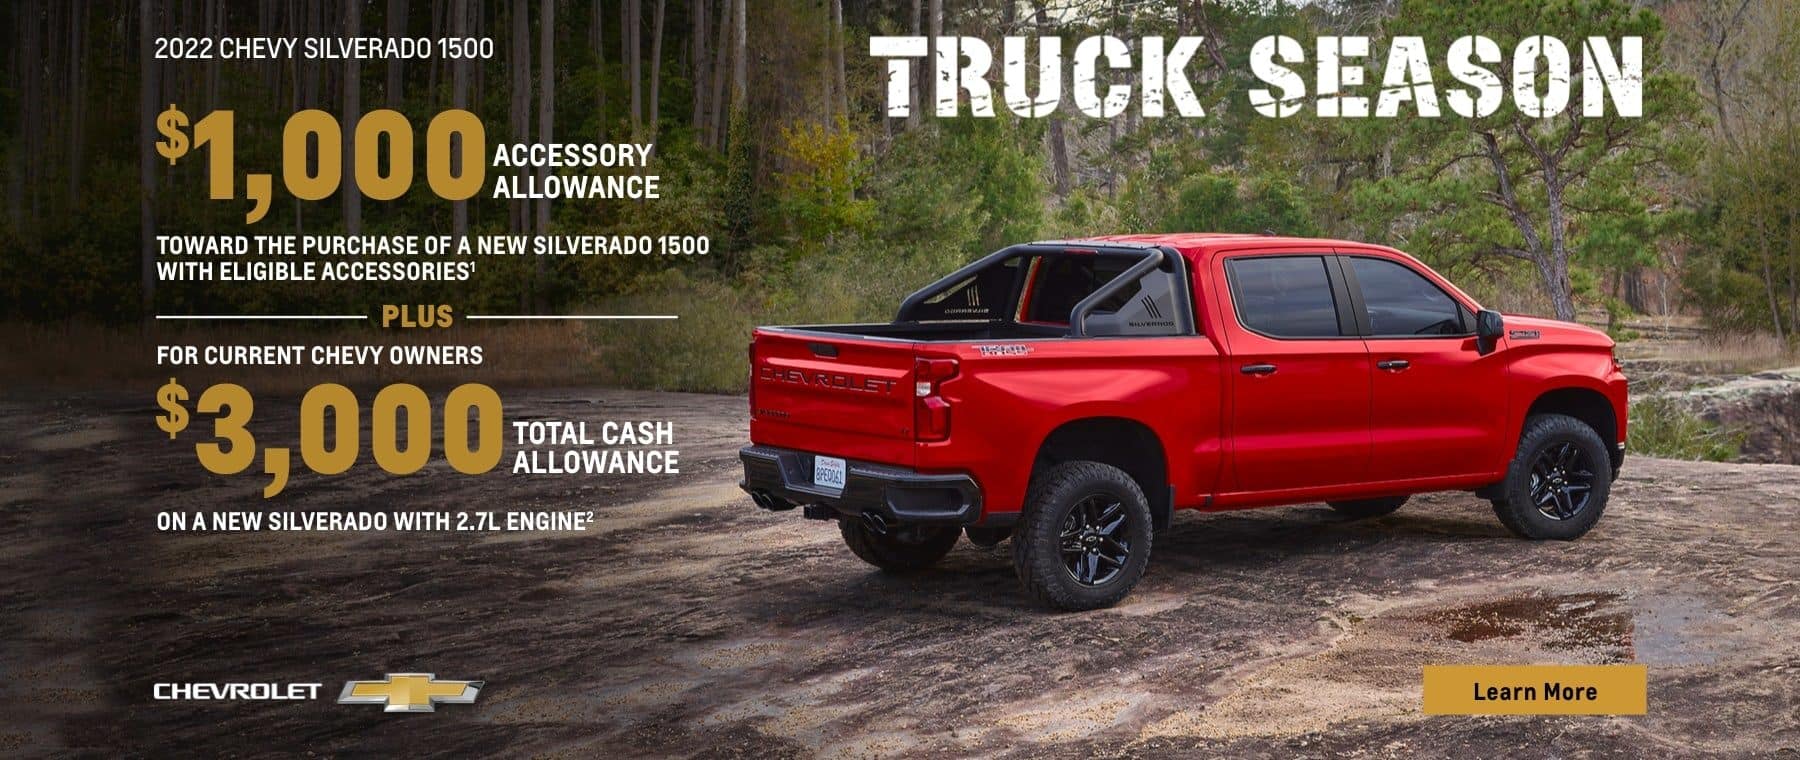 2022 Chevy Silverado 1500. Truck Season. Make it your own. $1,000 accessory allowance toward the purchase of a new Silverado 1500 with eligible accessories. Plus, for Chevy owners $3,000 total cash allowance when you purchase a new Silverado with 2.7L Engine.